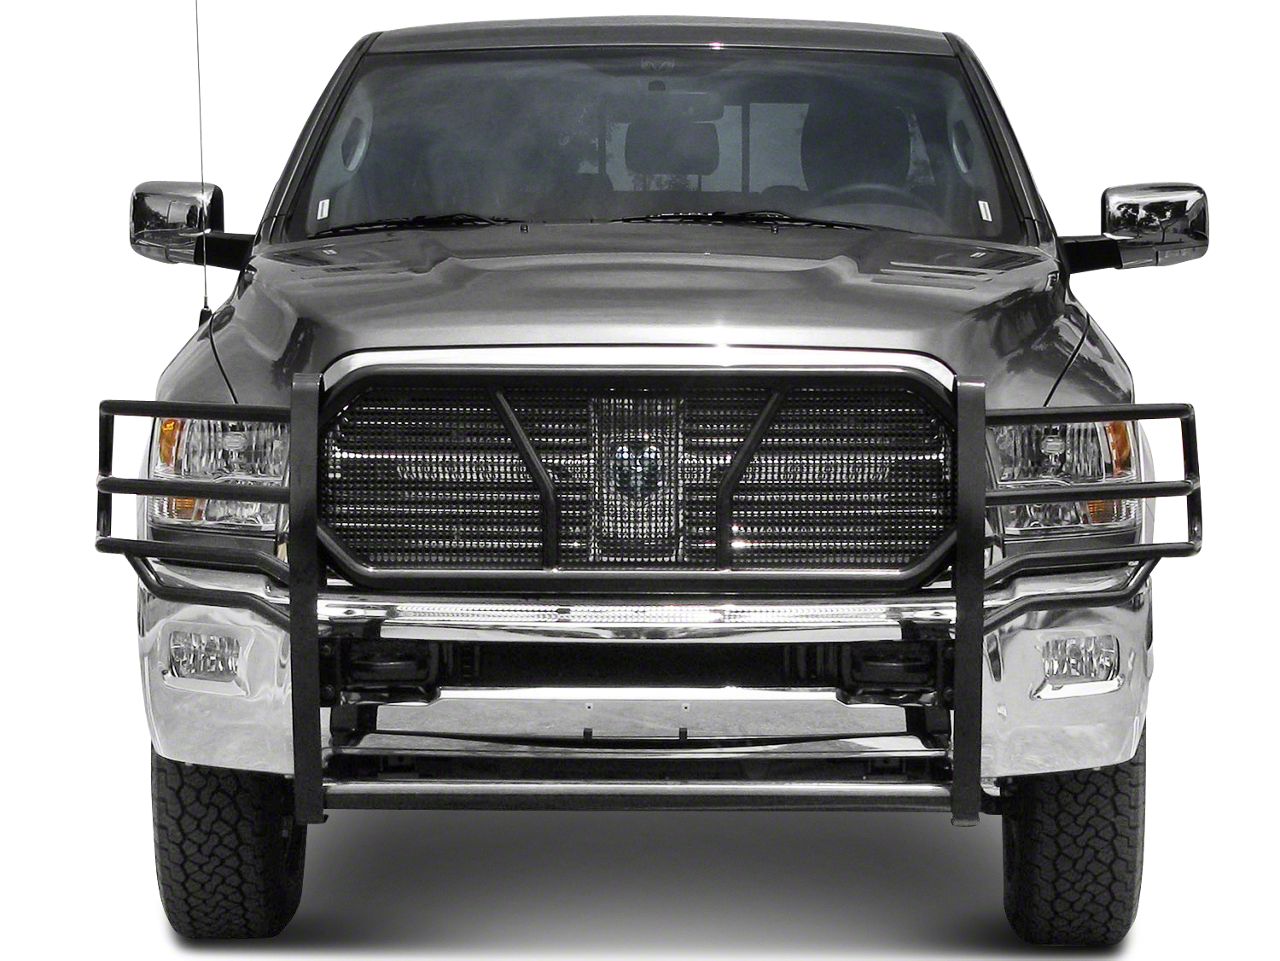 Ram 1500 Brush Guards & Grille Guards 2009-2018